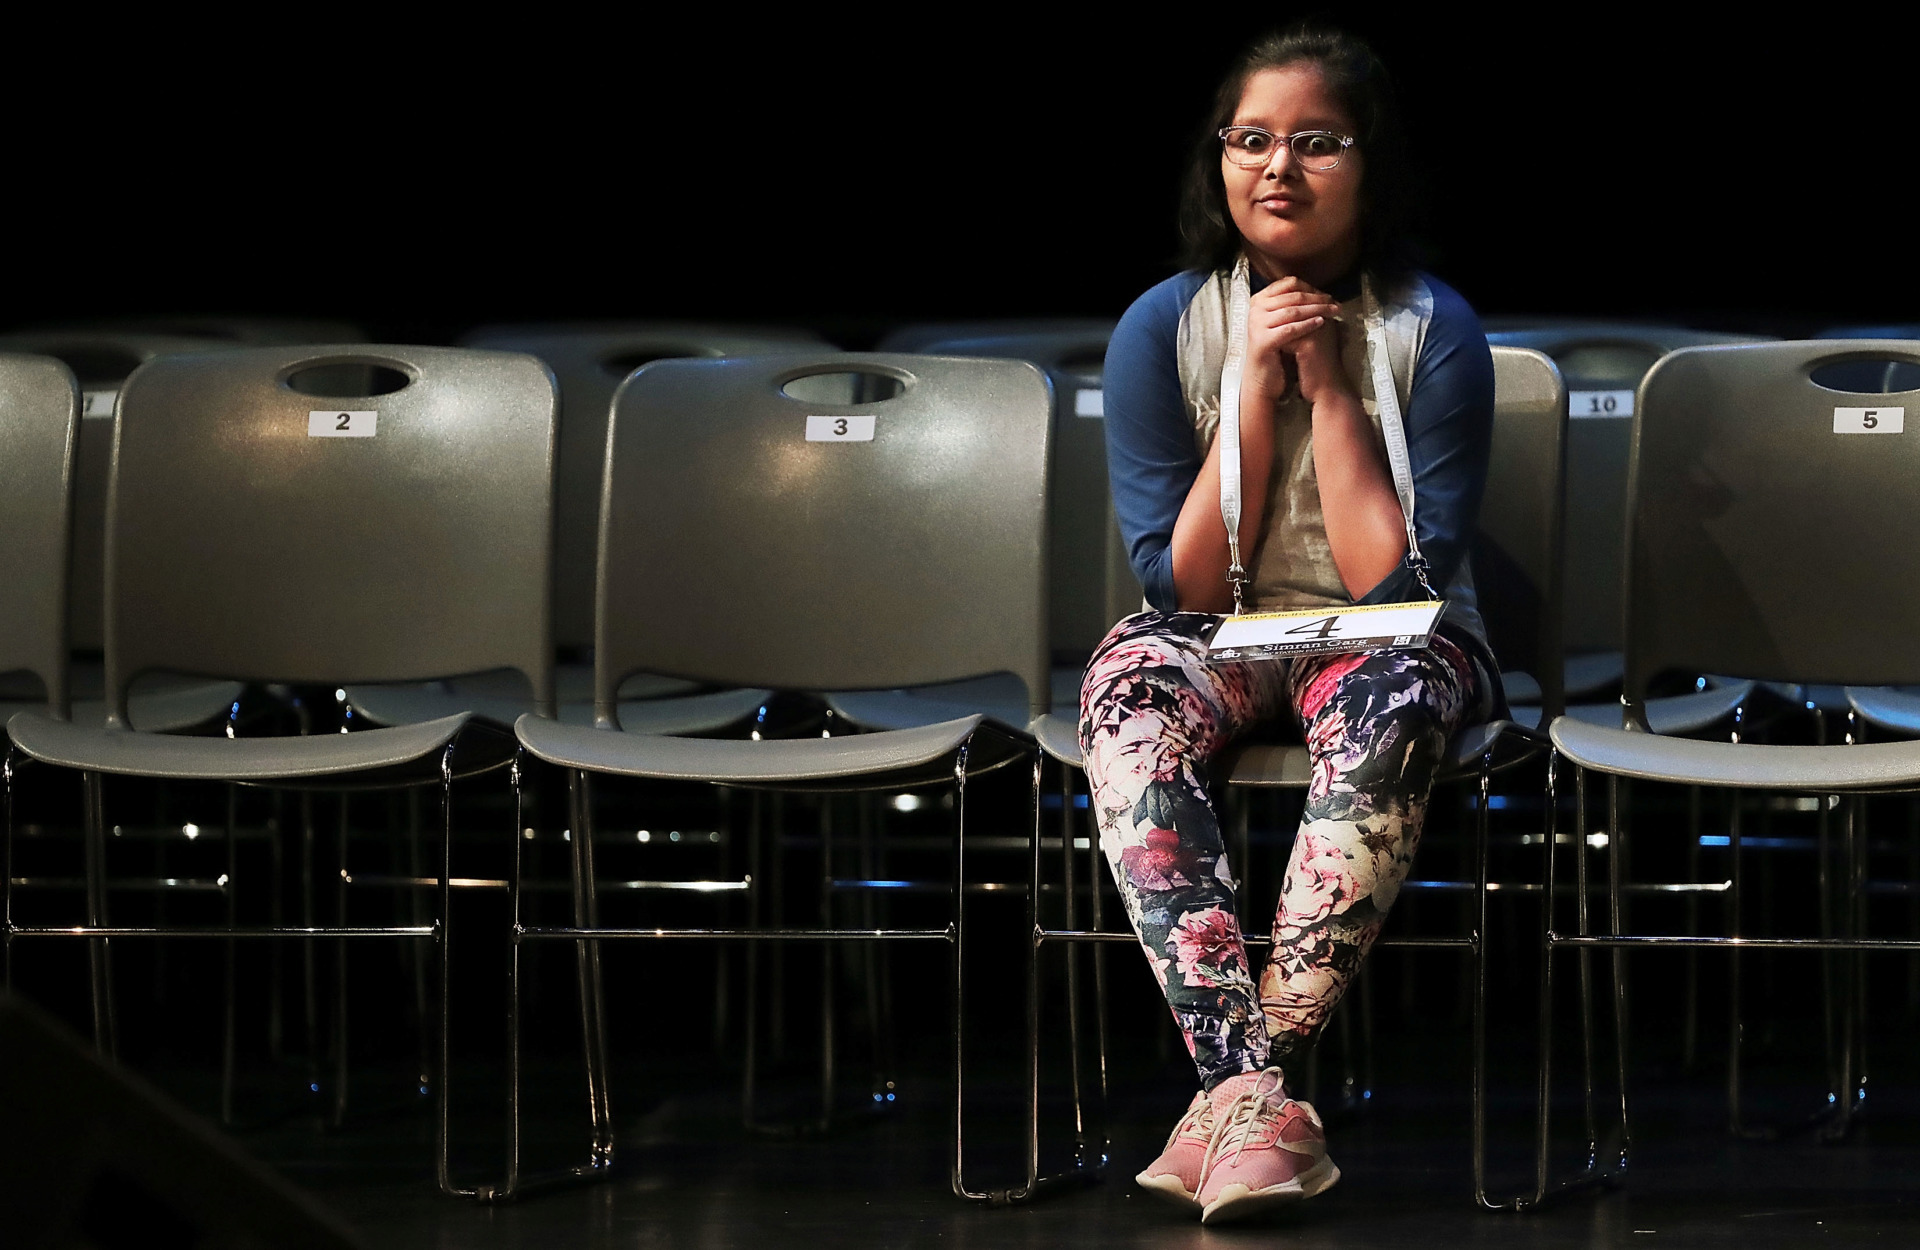 <strong>Simran Garg reacts after looking around at all the empty seats as she qualifies for the sixth round in the Shelby County Spelling Bee at the University of Memphis Michael D. Rose Theatre on Feb. 9, 2019. </strong>&nbsp;(Jim Weber/Daily Memphian)